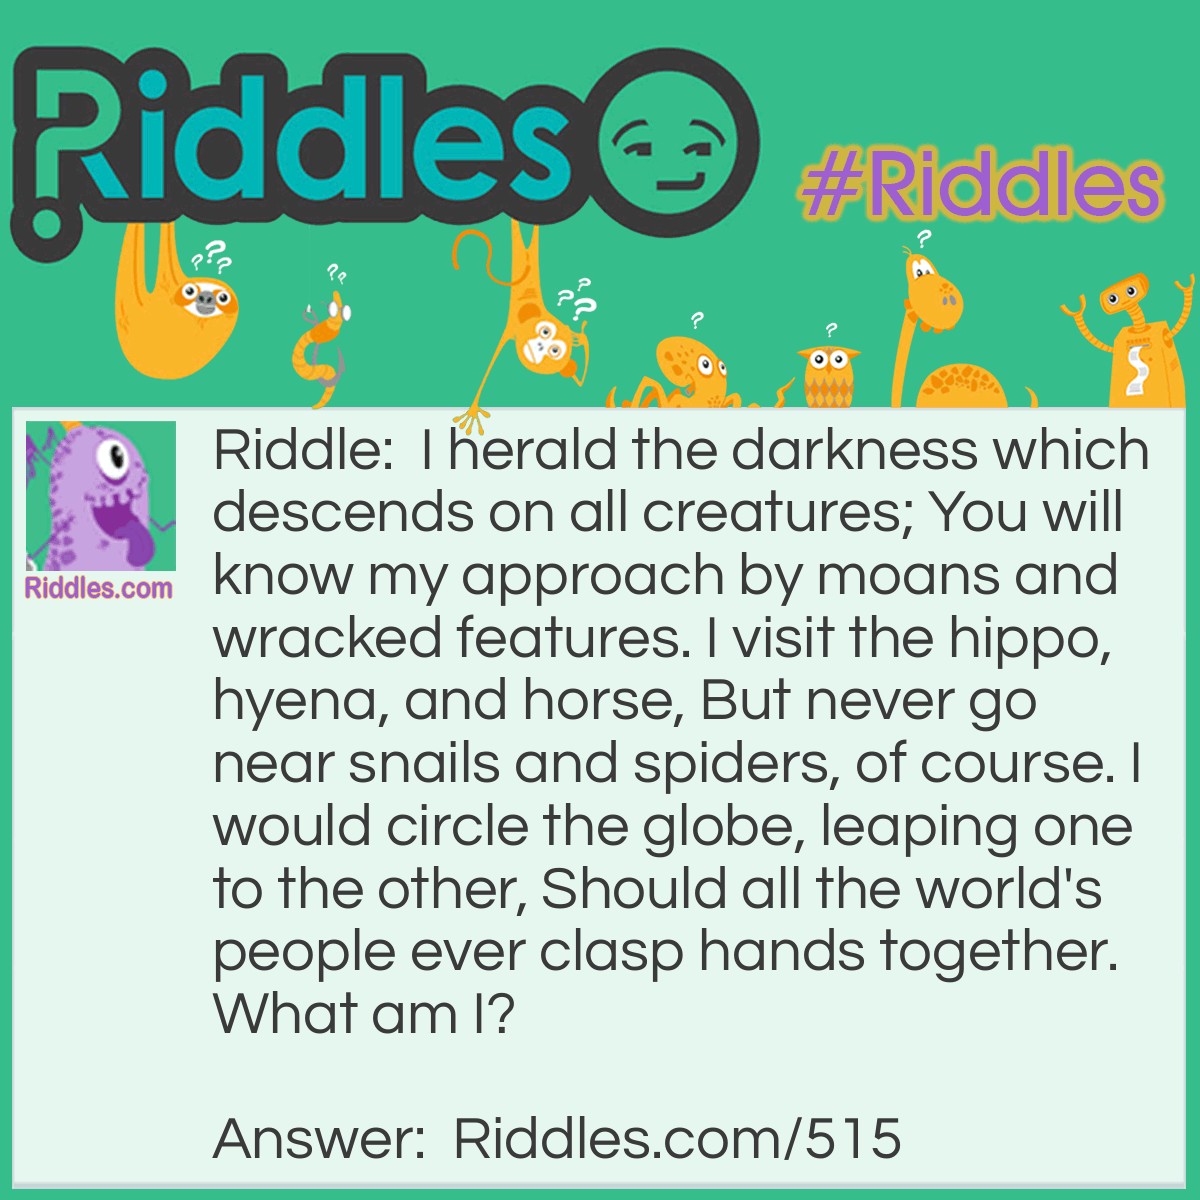 Riddle: I herald the darkness which descends on all creatures; You will know my approach by moans and wracked features. I visit the hippo, hyena, and horse, But never go near snails and spiders, of course. I would circle the globe, leaping one to the other, Should all the world's people ever clasp hands together.
What am I? Answer: I am a Yawn.